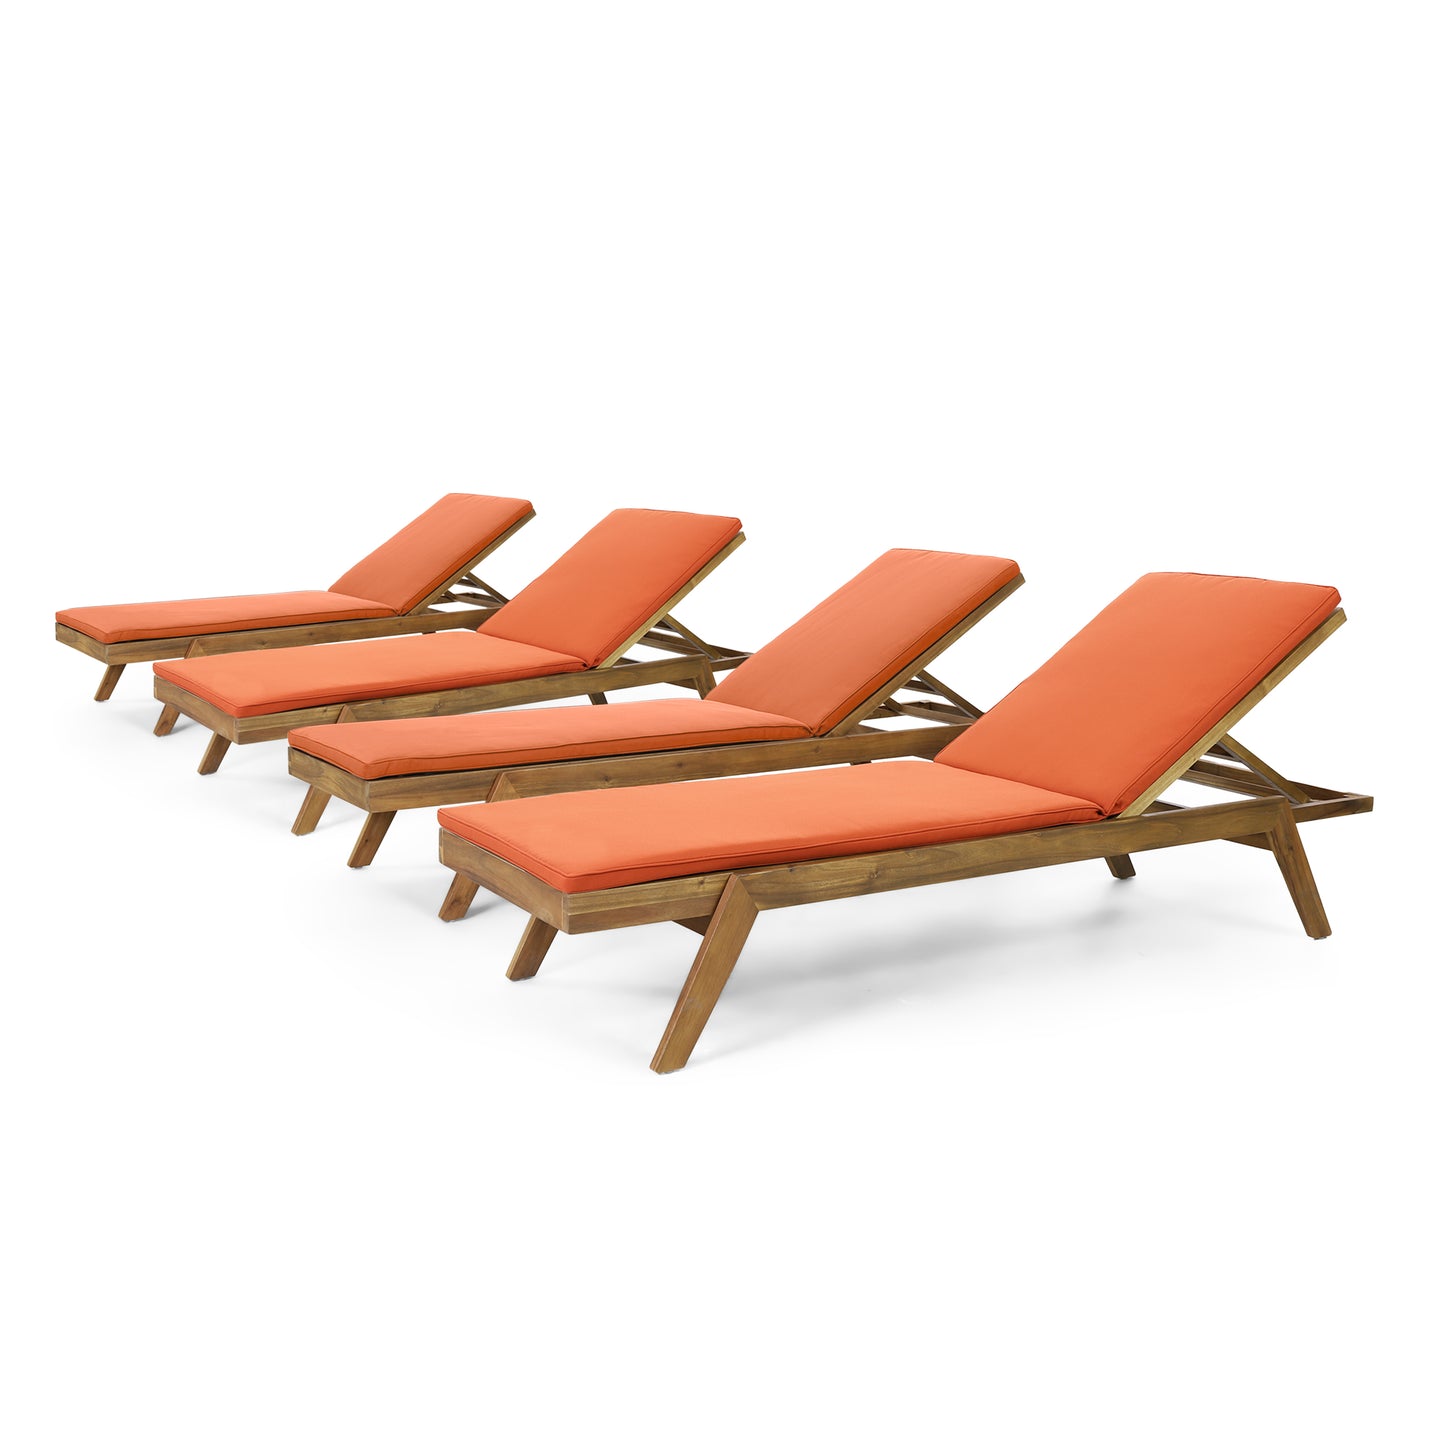 Larimore Outdoor Acacia Wood Chaise Lounge with Water Resistant Cushions, Set of 4